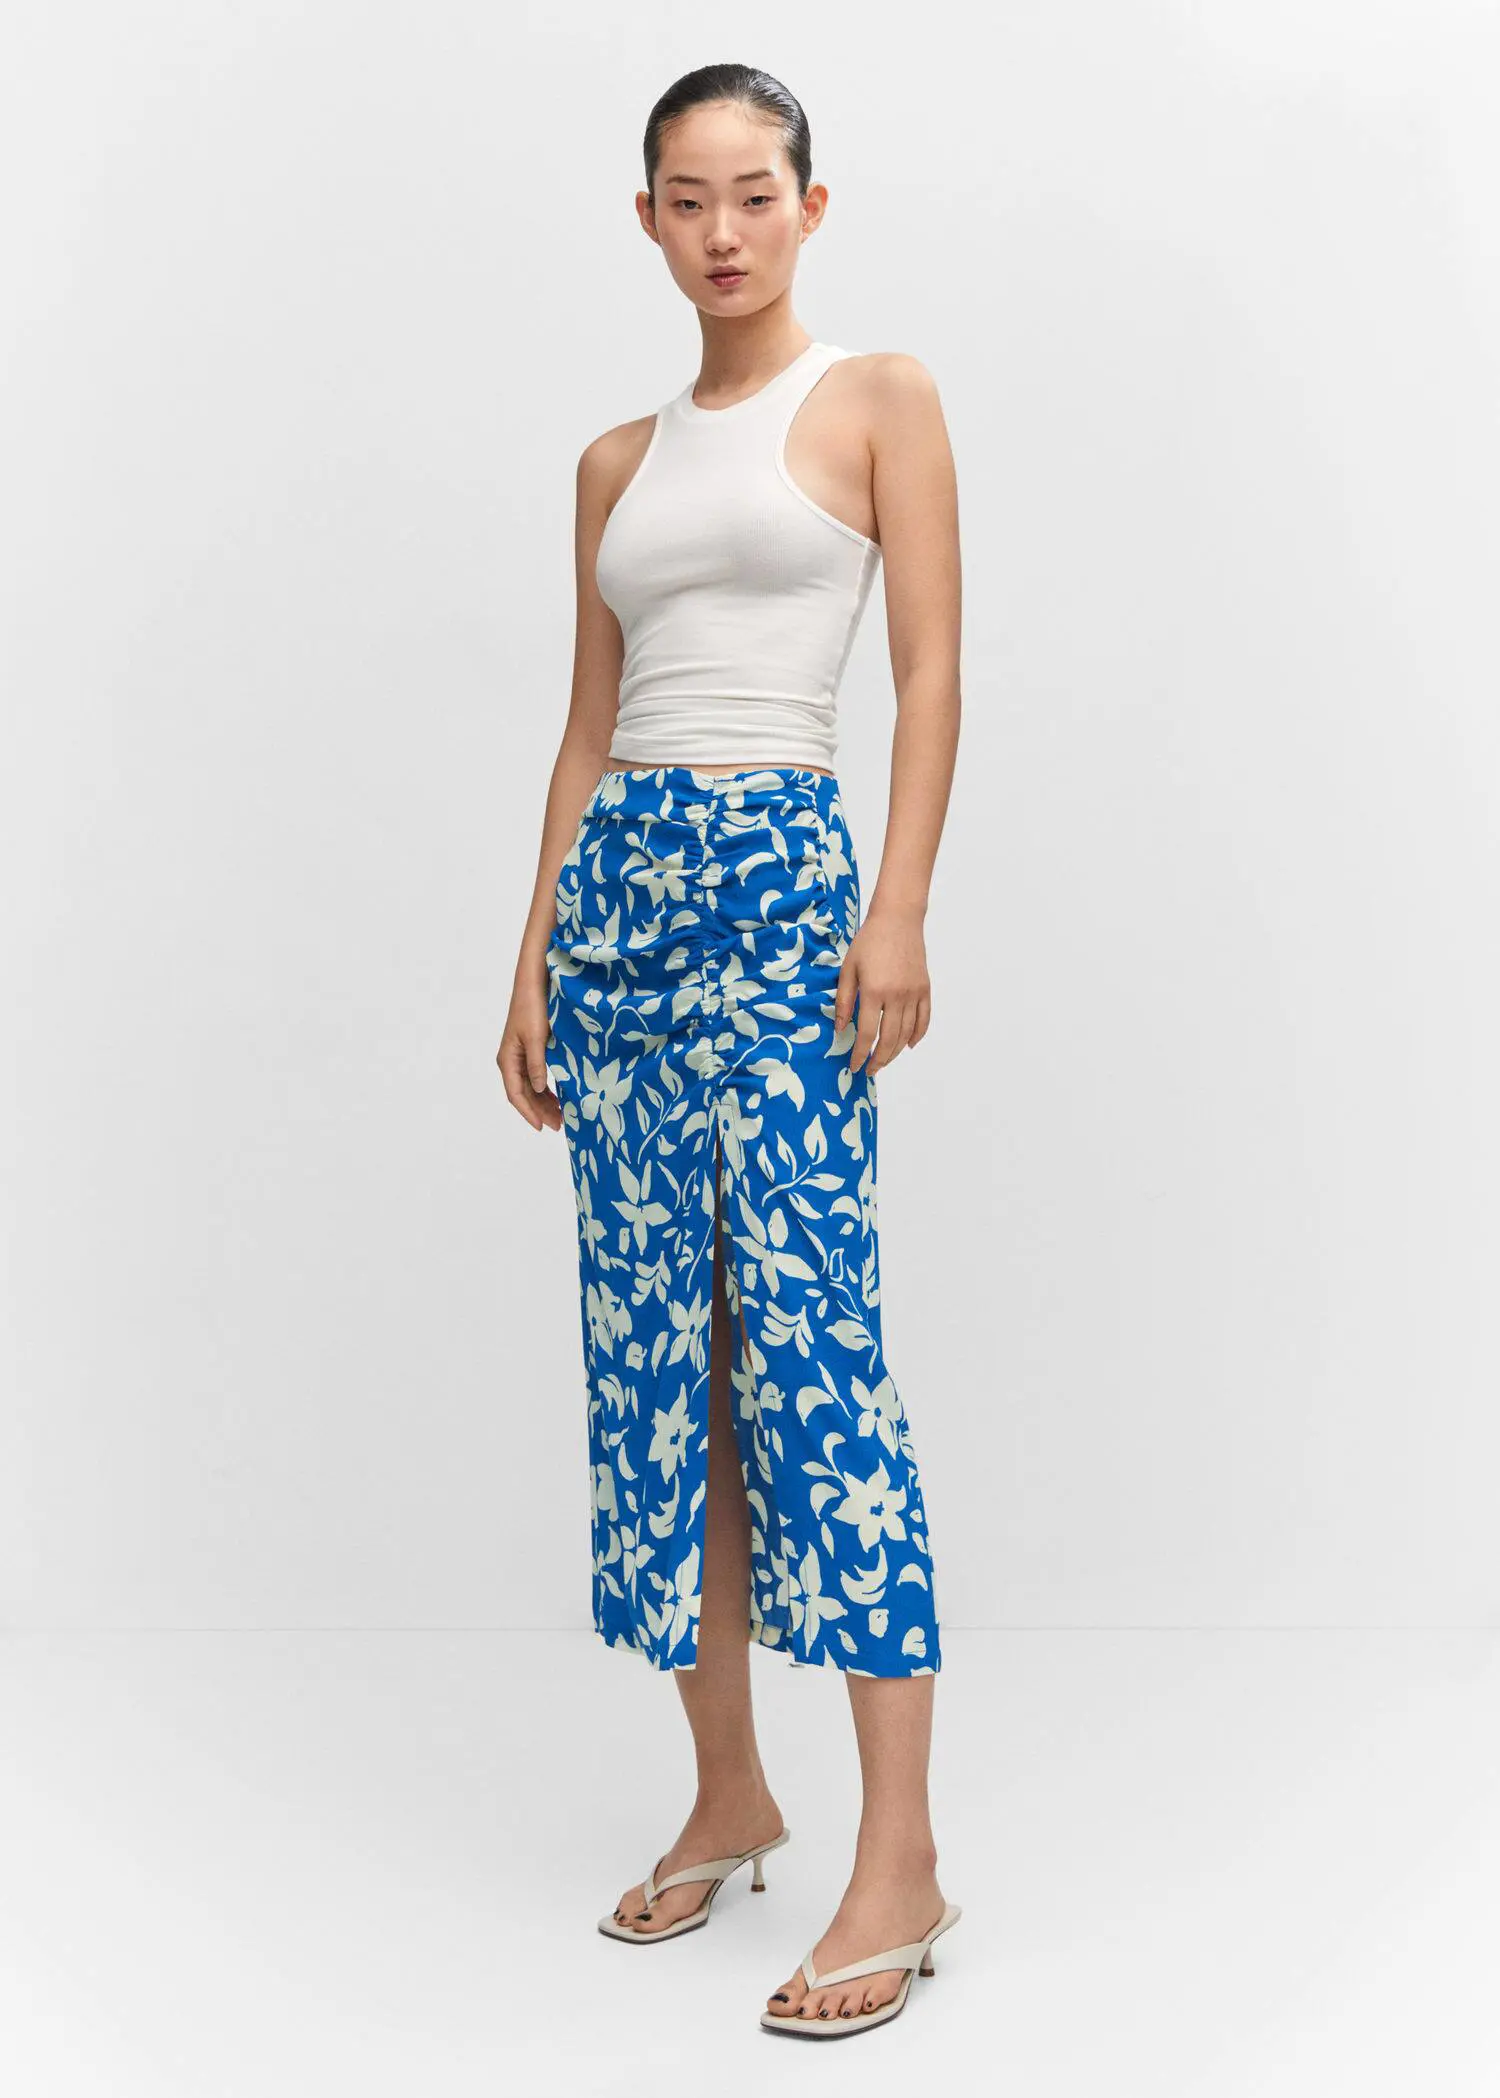 Mango Printed skirt with slit. a woman wearing a white top and blue skirt. 